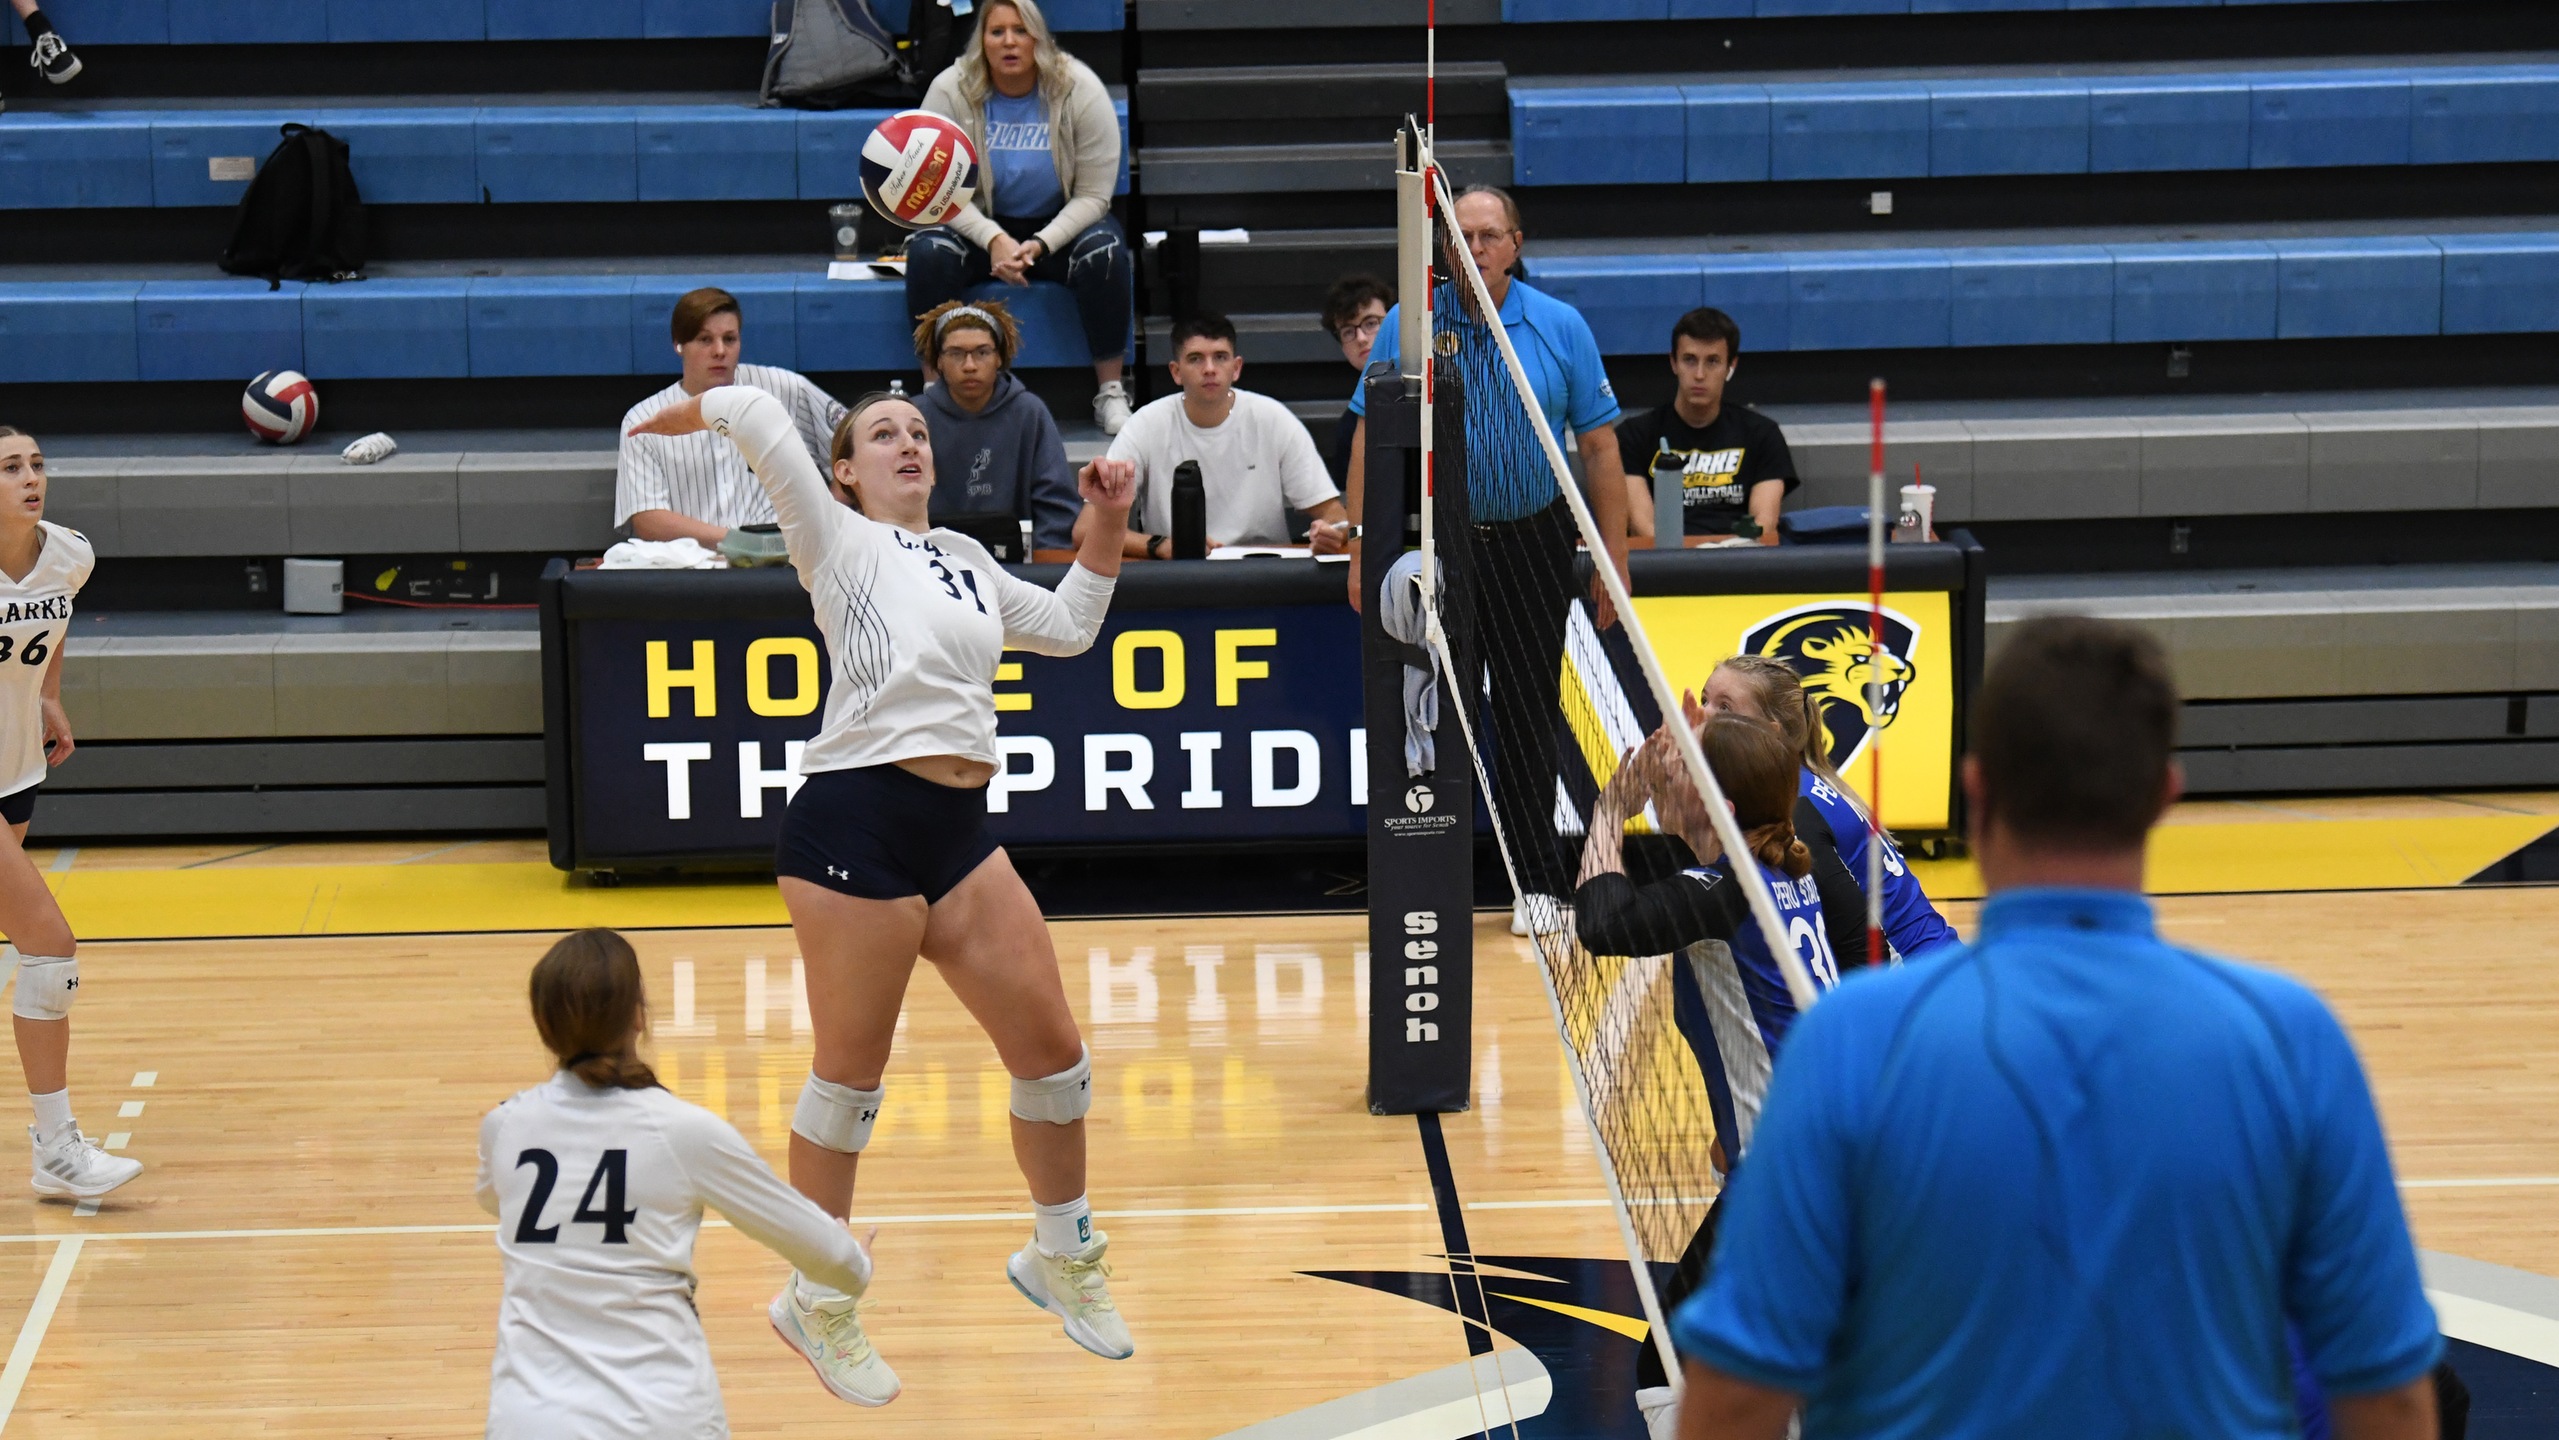 Peru State defends their home court by defeating the Pride 3-1